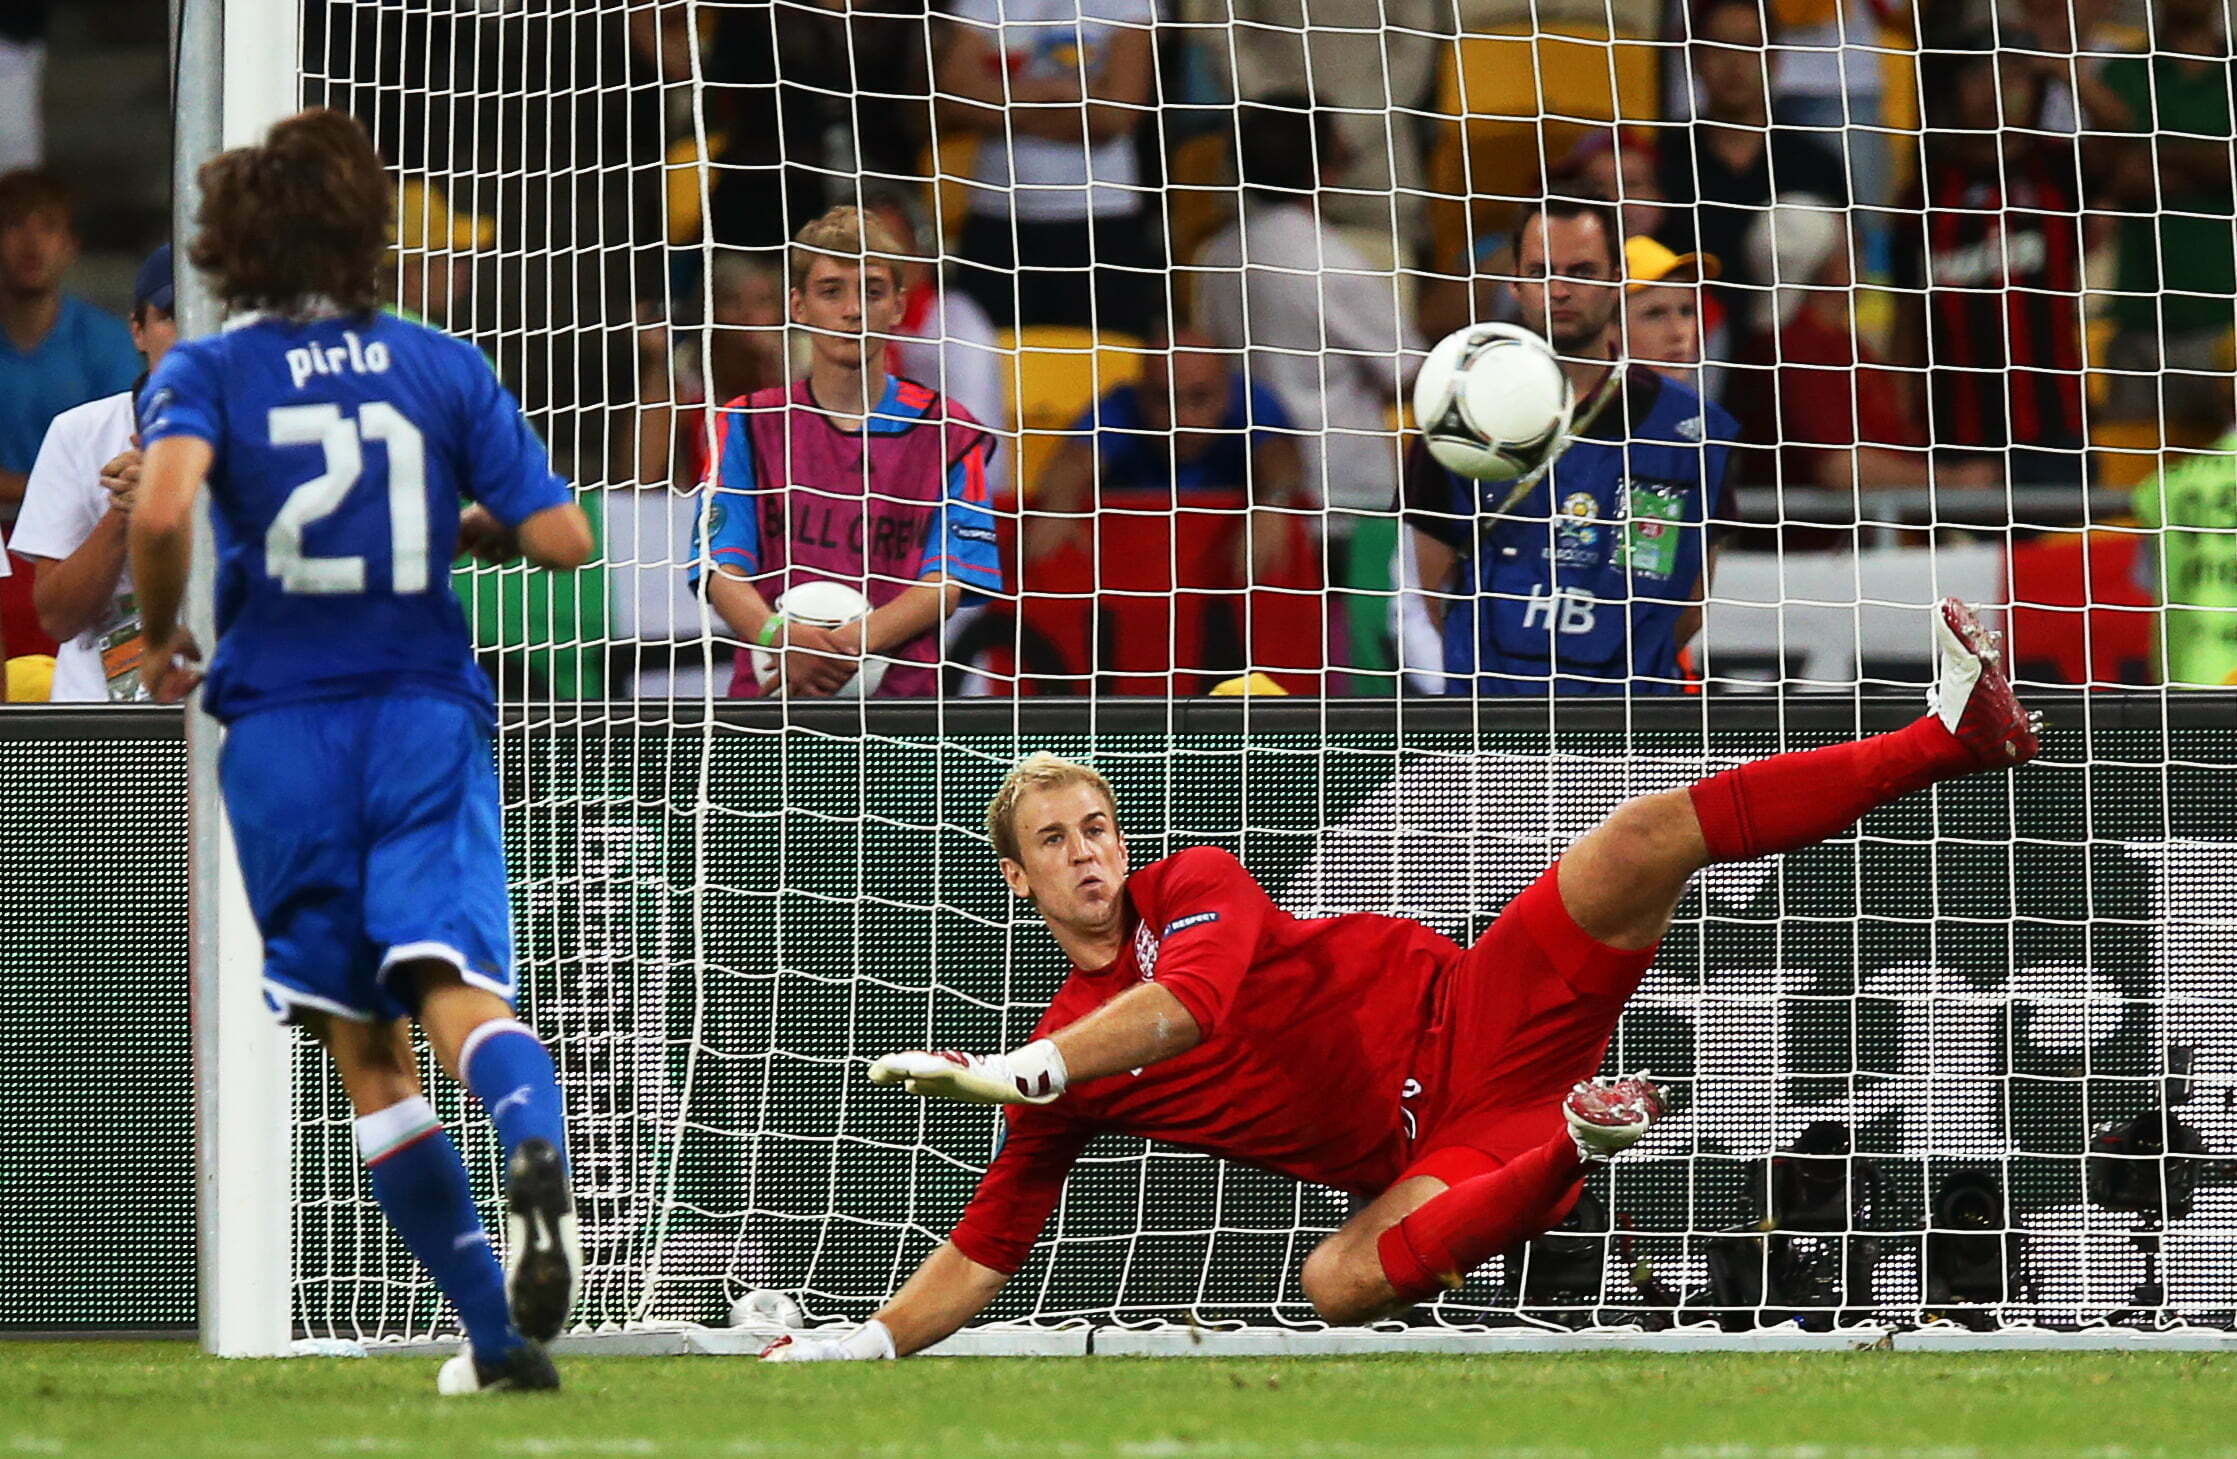 epa03280280 Italy's Andrea Pirlo (L) scores against England goalkeeper Joe Hart (R) during the penalty shootout of the quarter final match of the UEFA EURO 2012 between England and Italy in Kiev, Ukraine, 24 June 2012. Italy won 4-2 after penalty shootout. EPA/SRDJAN SUKI UEFA Terms and Conditions apply http://www.epa.eu/downloads/UEFA-EURO2012-TCS.pdf